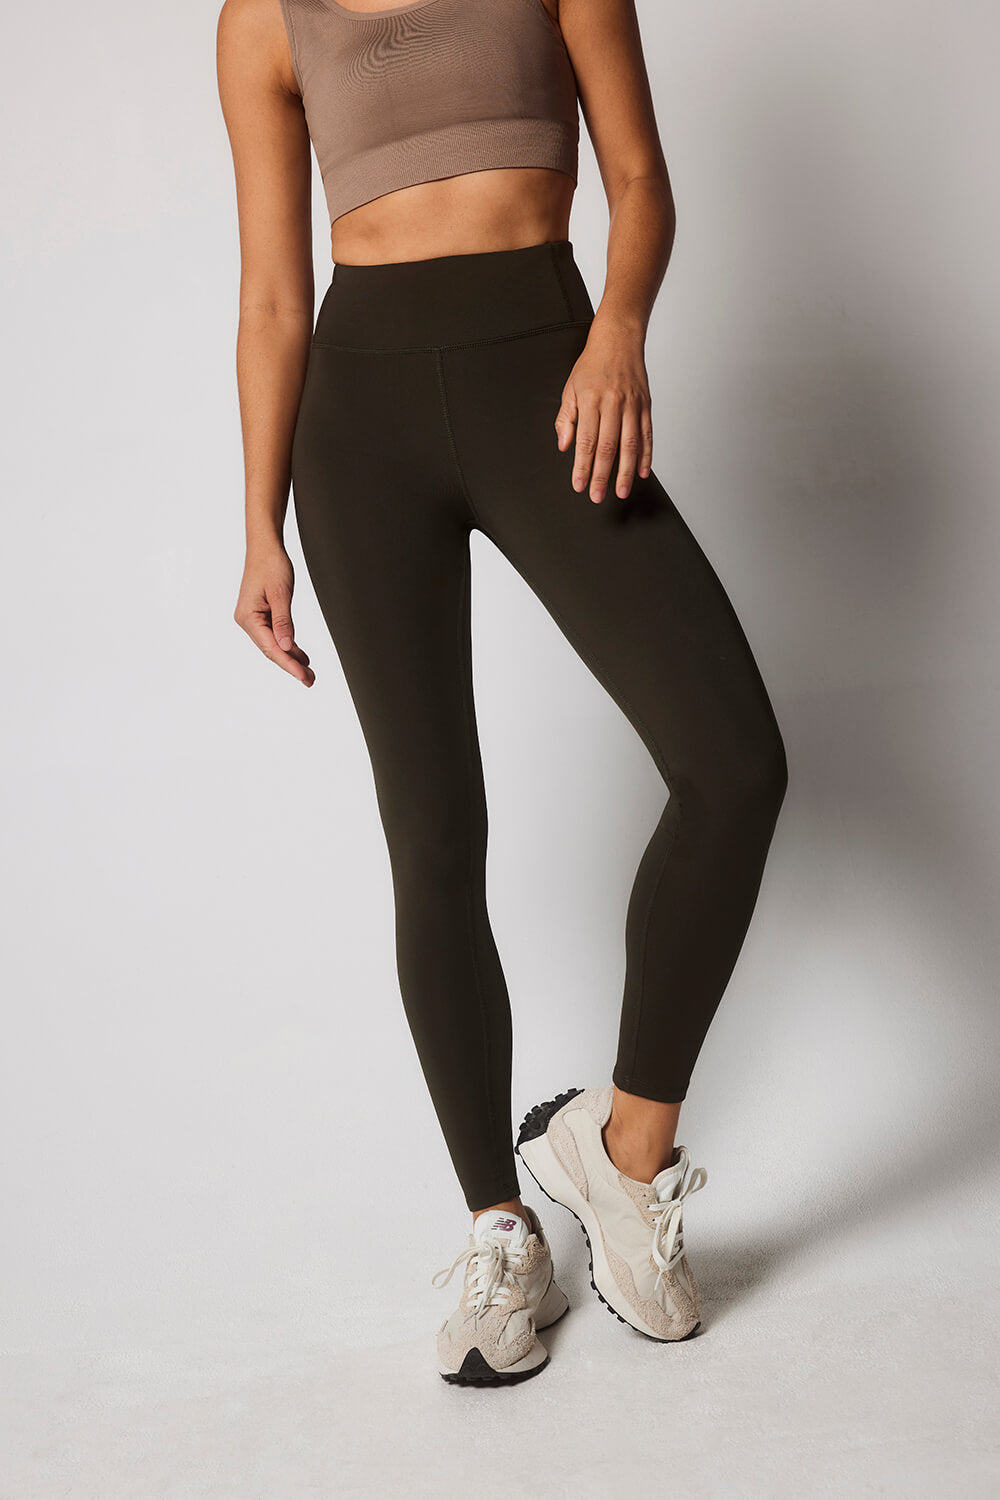 Legging Olive | RectoVerso premium activewear for women - RectoVerso Sports